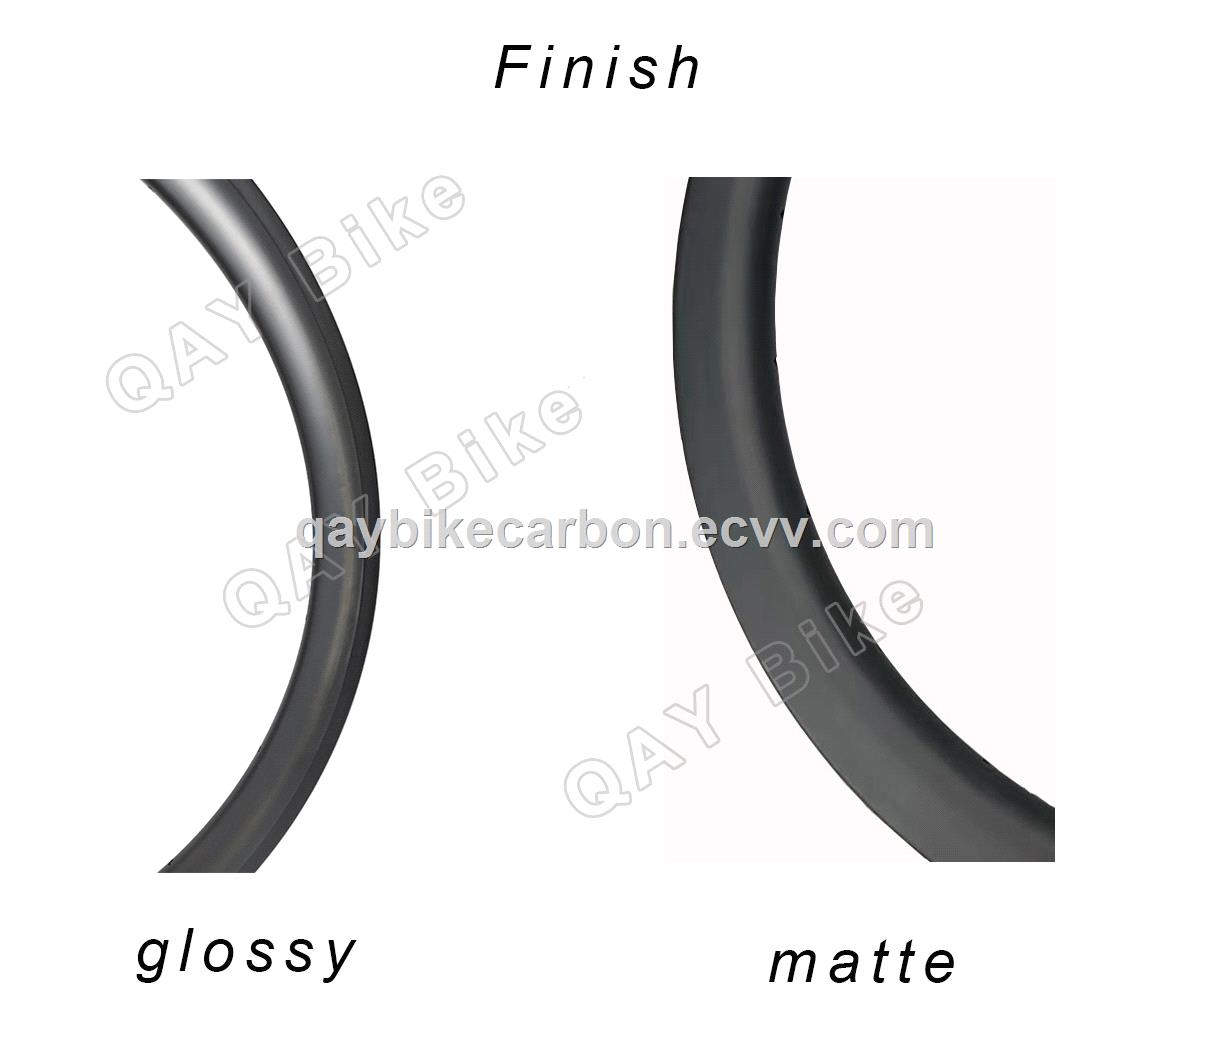 650B TUBELESS HOOKLESS CARBON BICYCLE rims